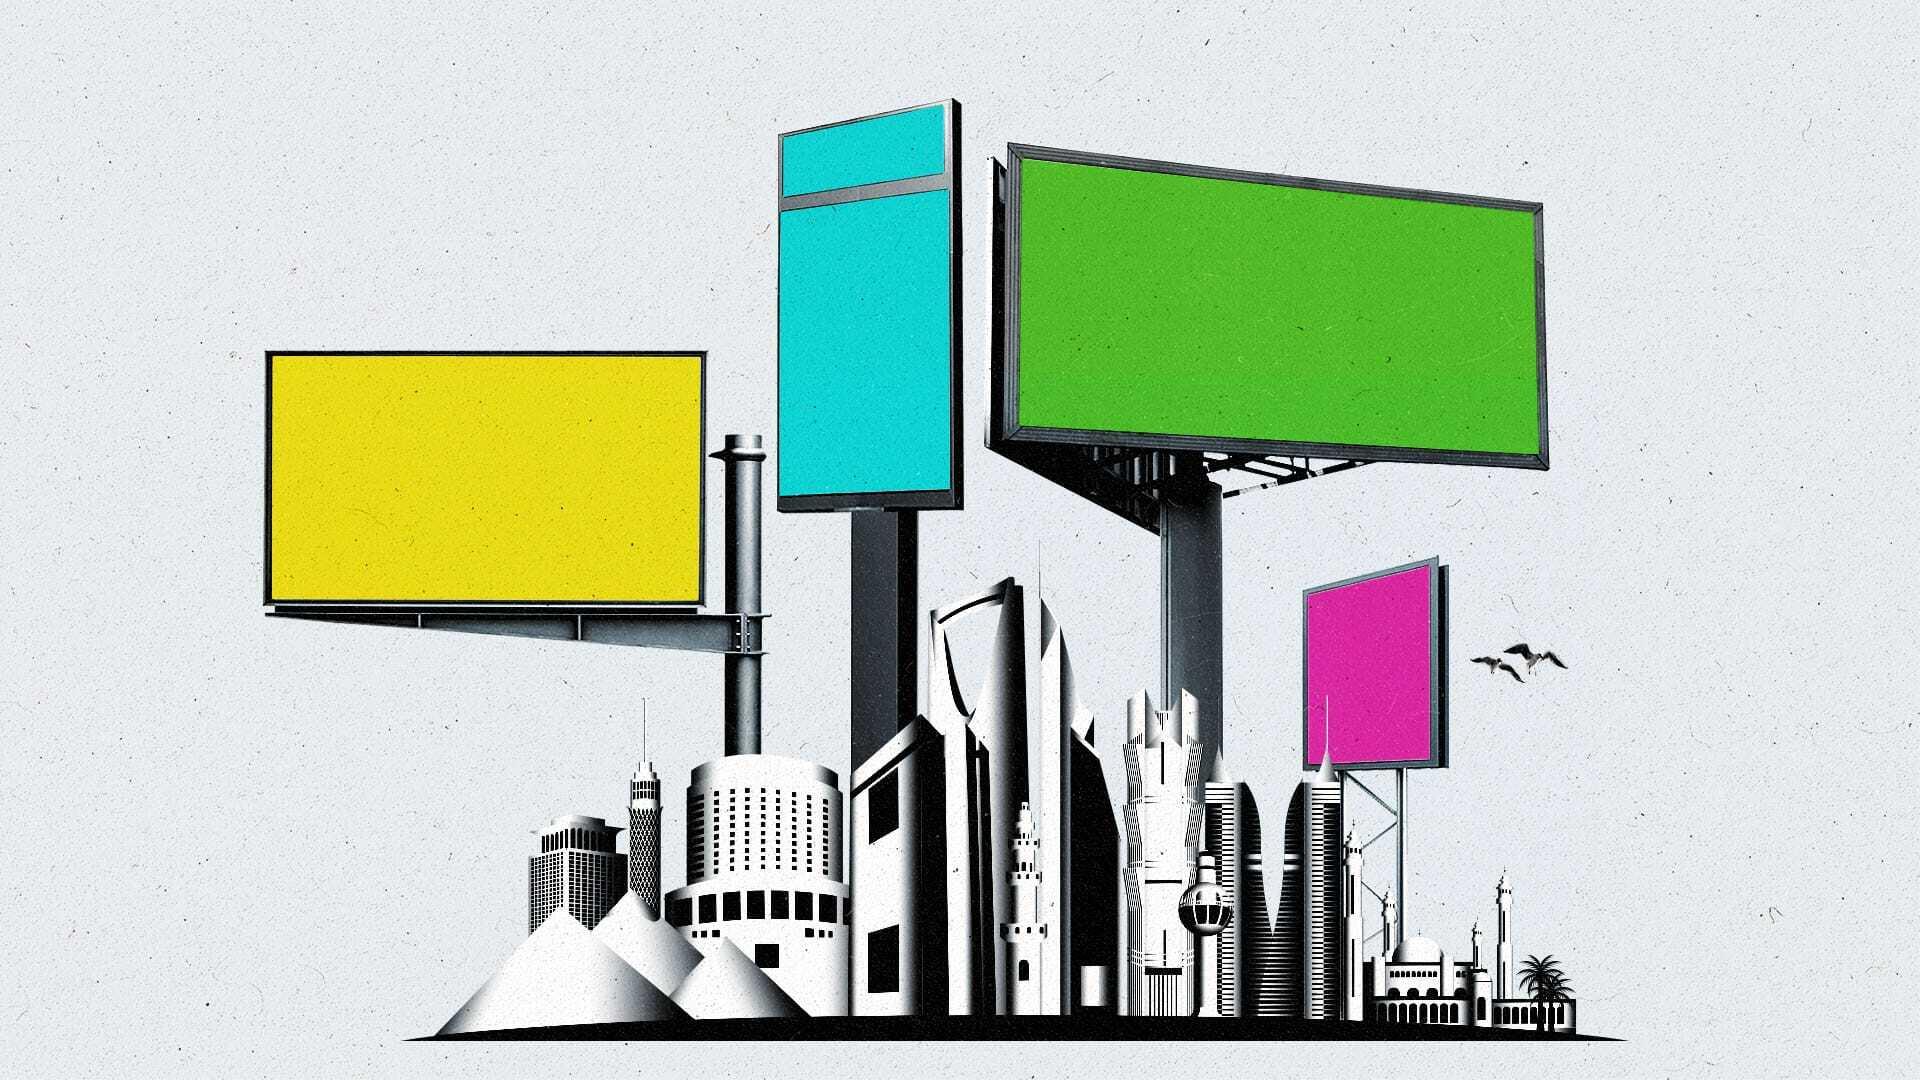 A variety of DOOH billboards rise above a city skyline filled with MENA buildings.